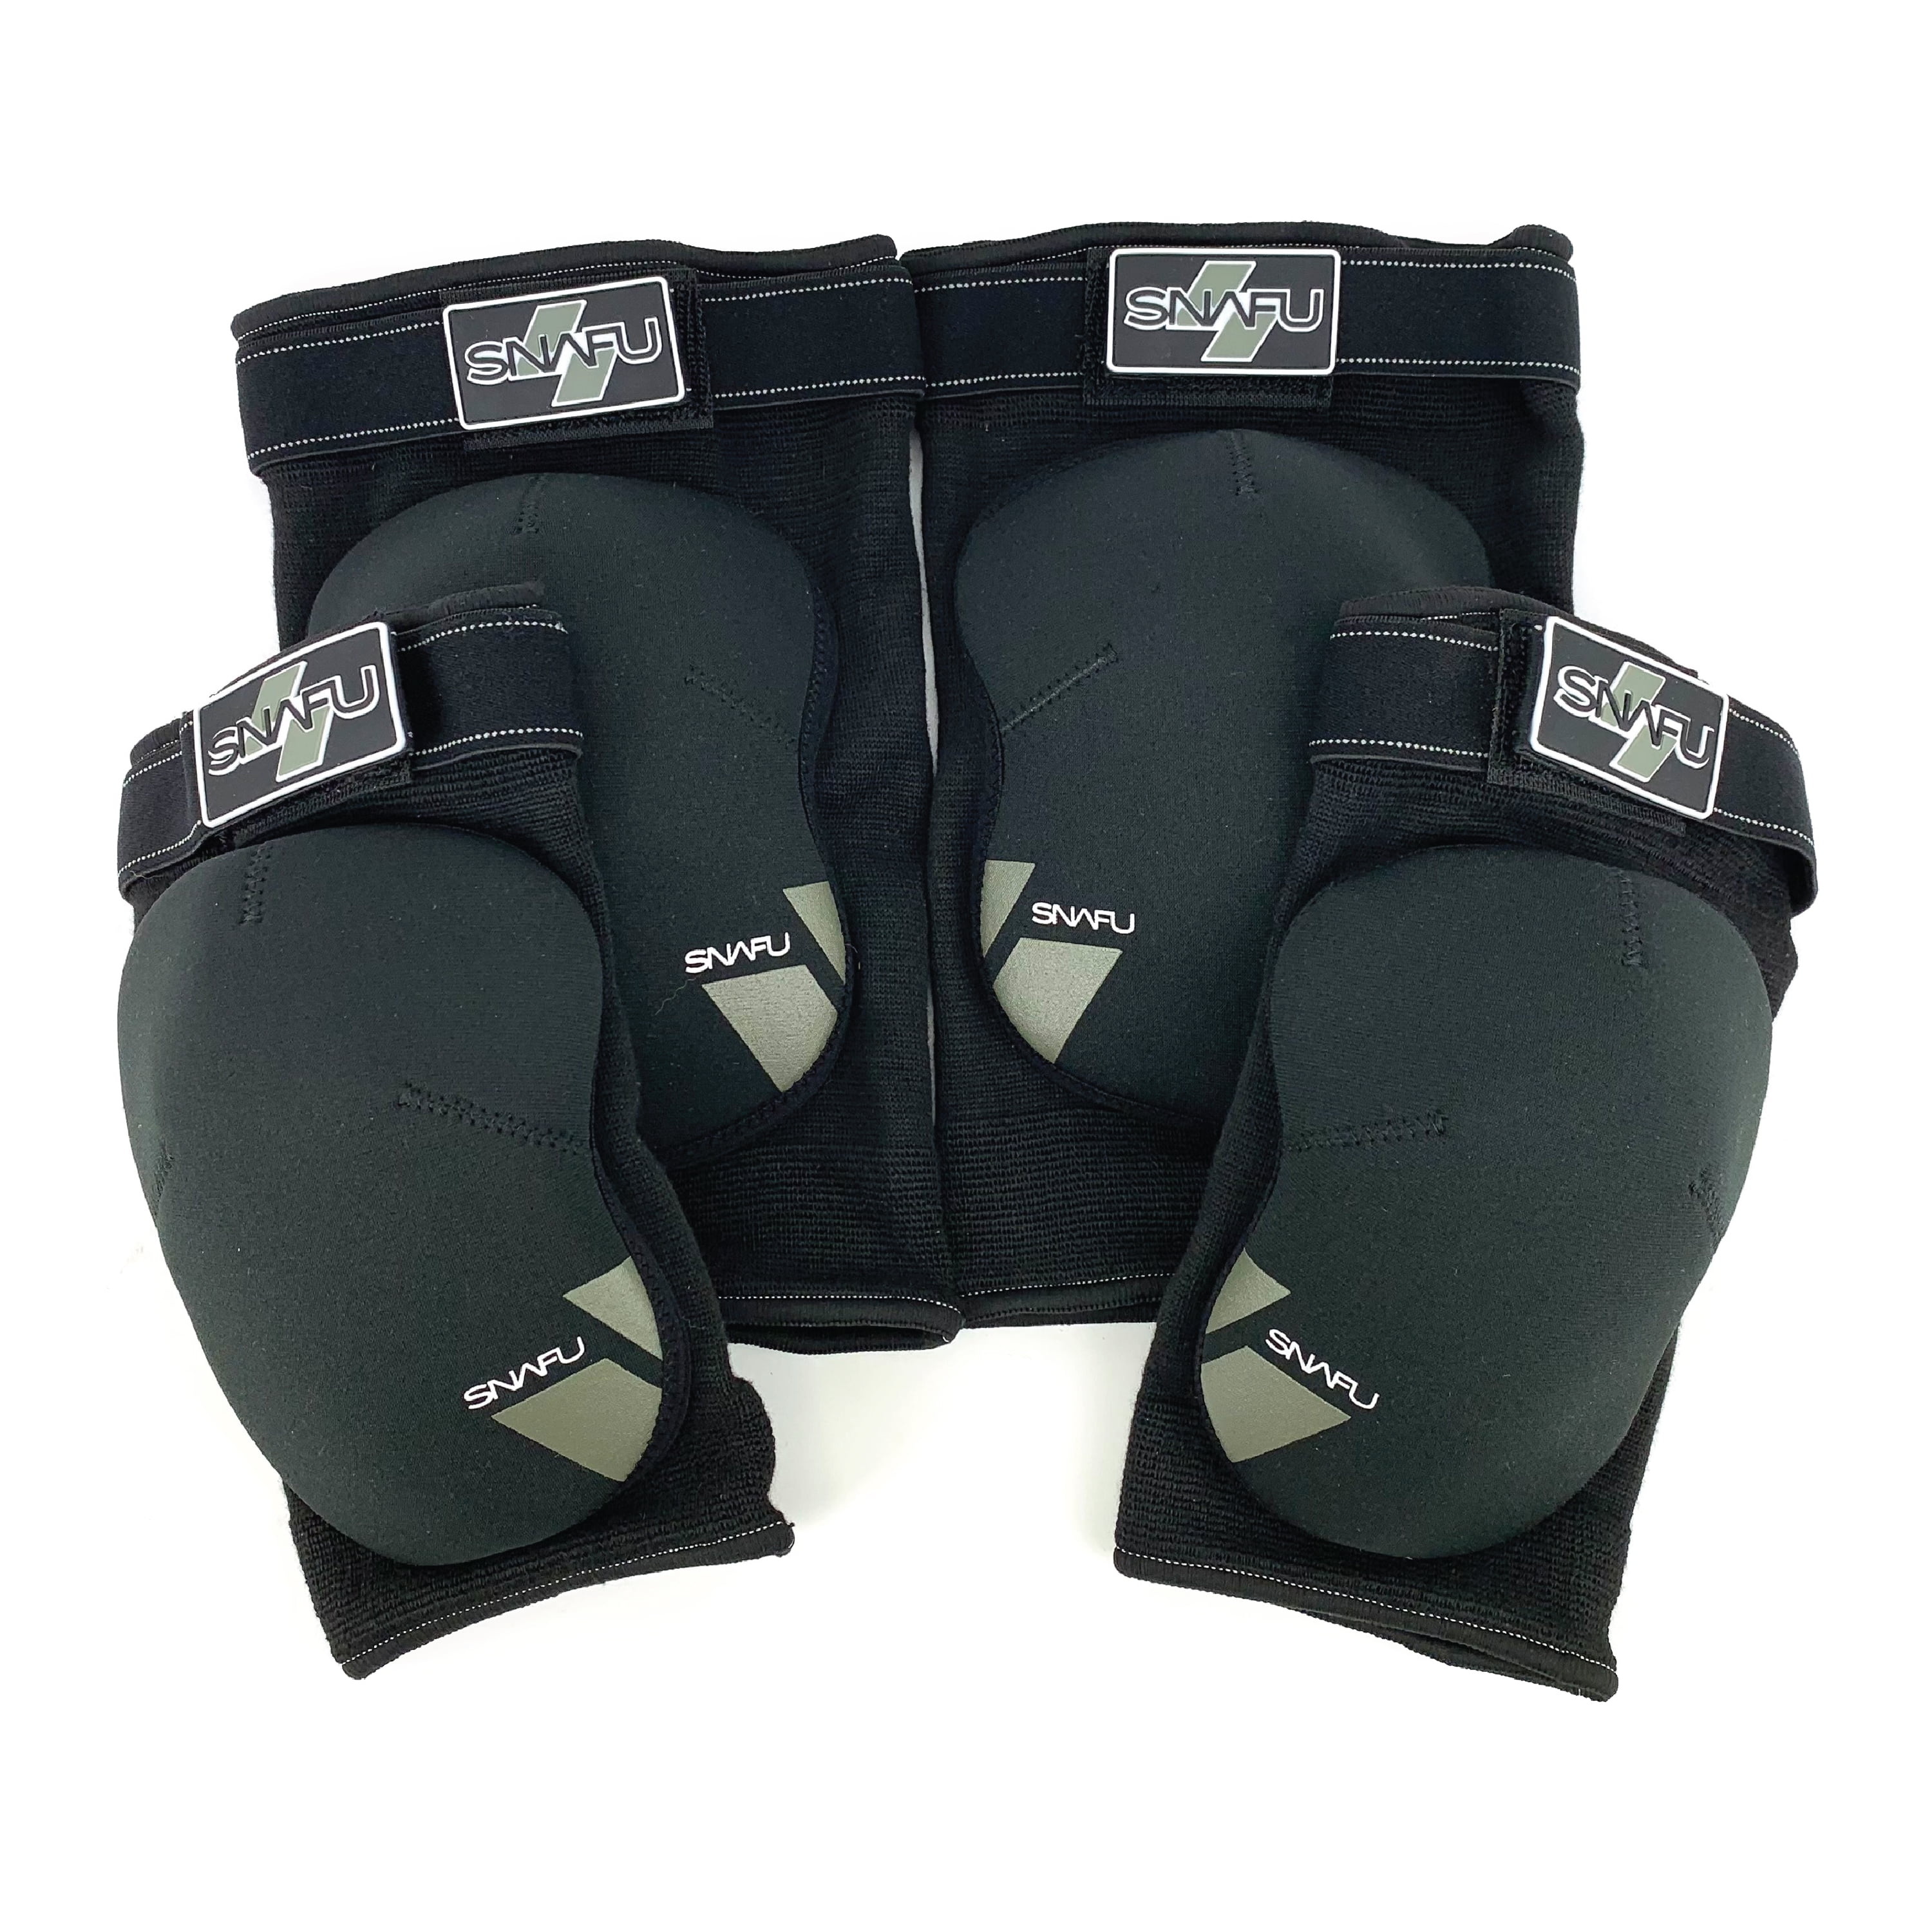 Kids Pull-On Scooter Knee Pads